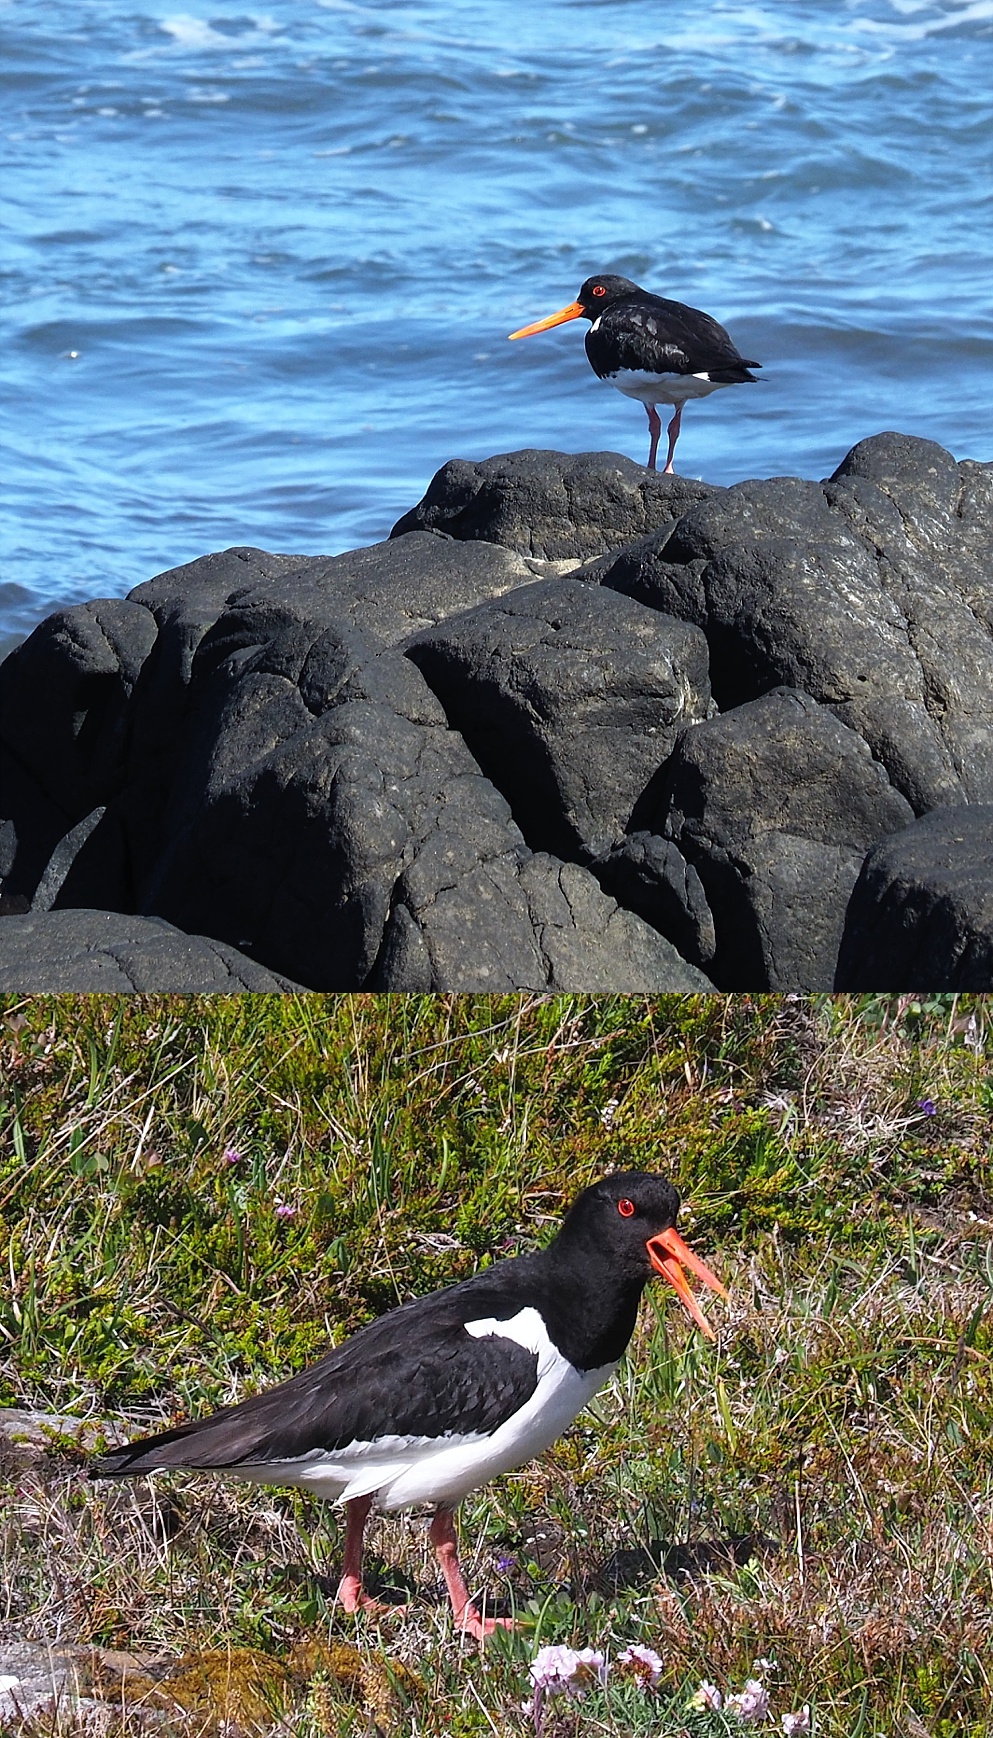 Views of oystercatchers on shoreline and in a field